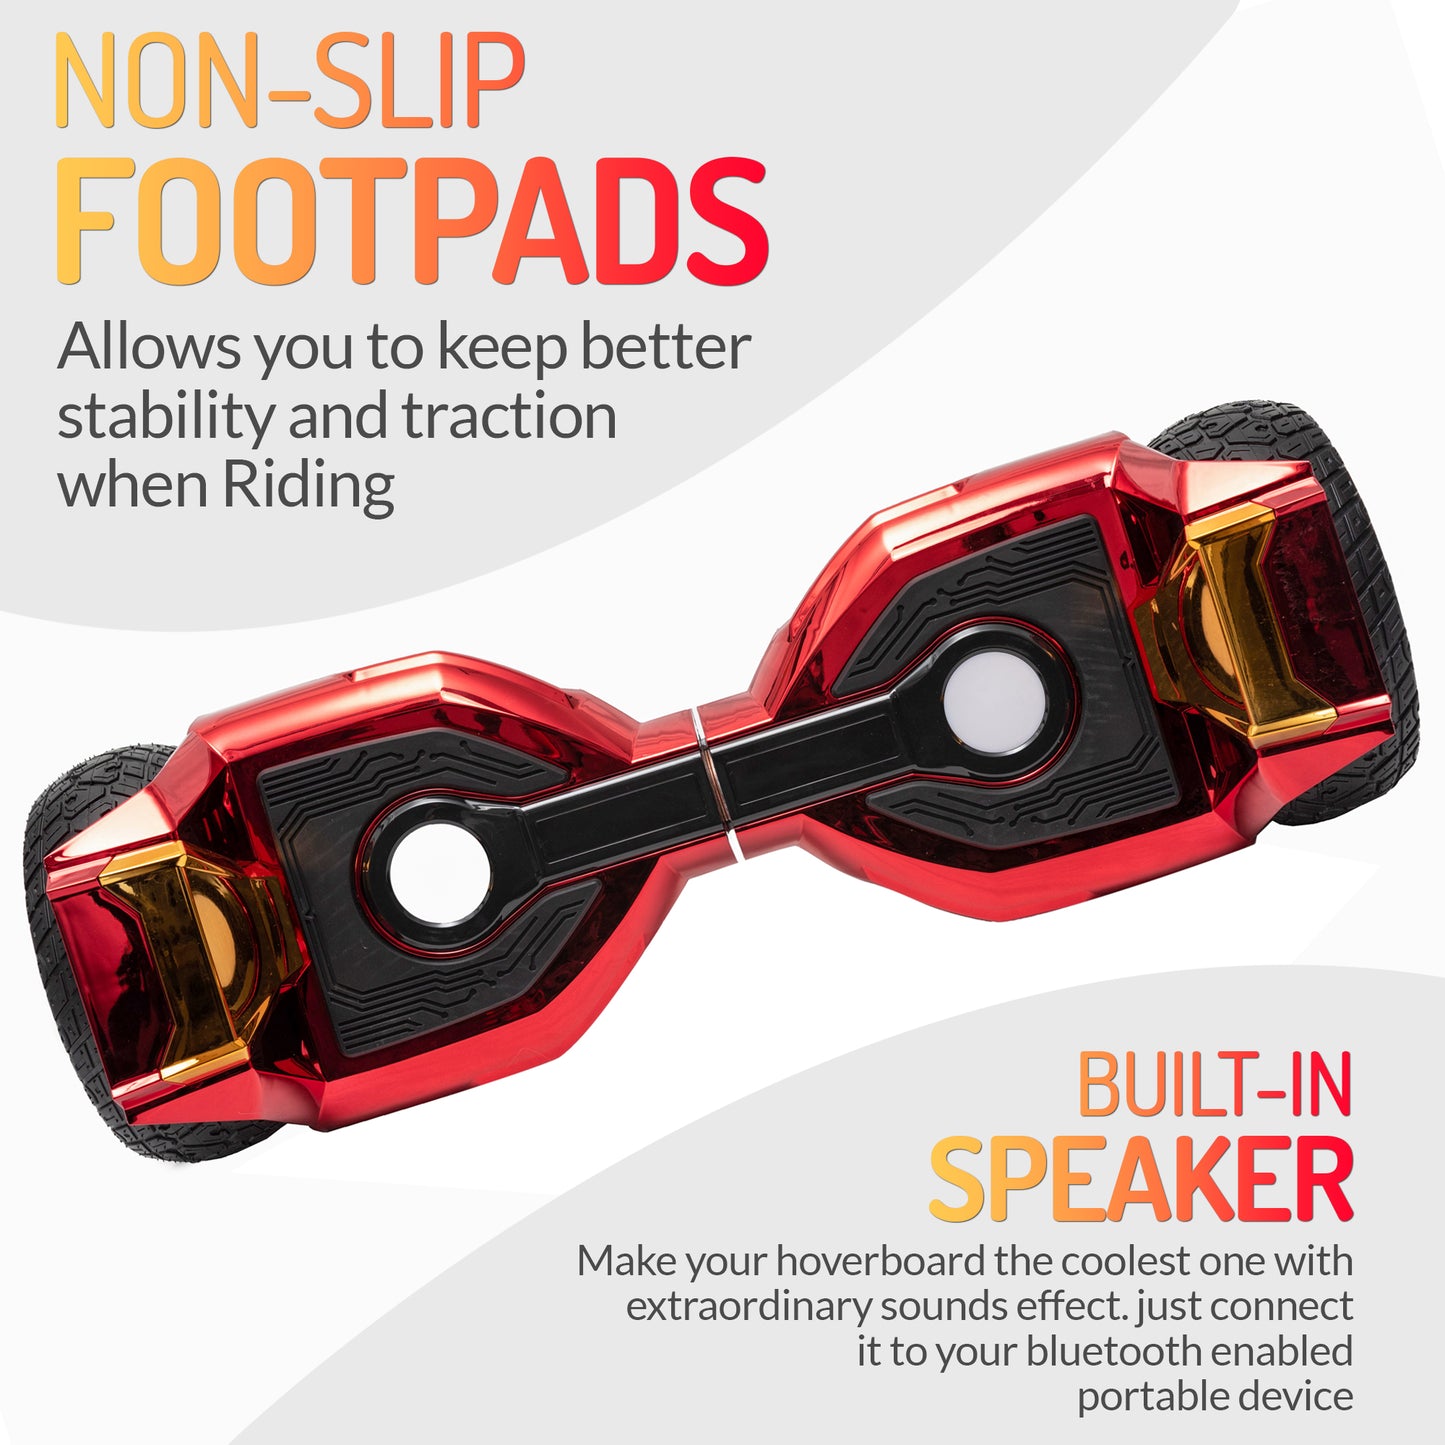 8.5" All Terrain Hoverboard with Bluetooth Speakers and LED Lights Self Balancing Scooter for Kids Adults, UL Safety Certified